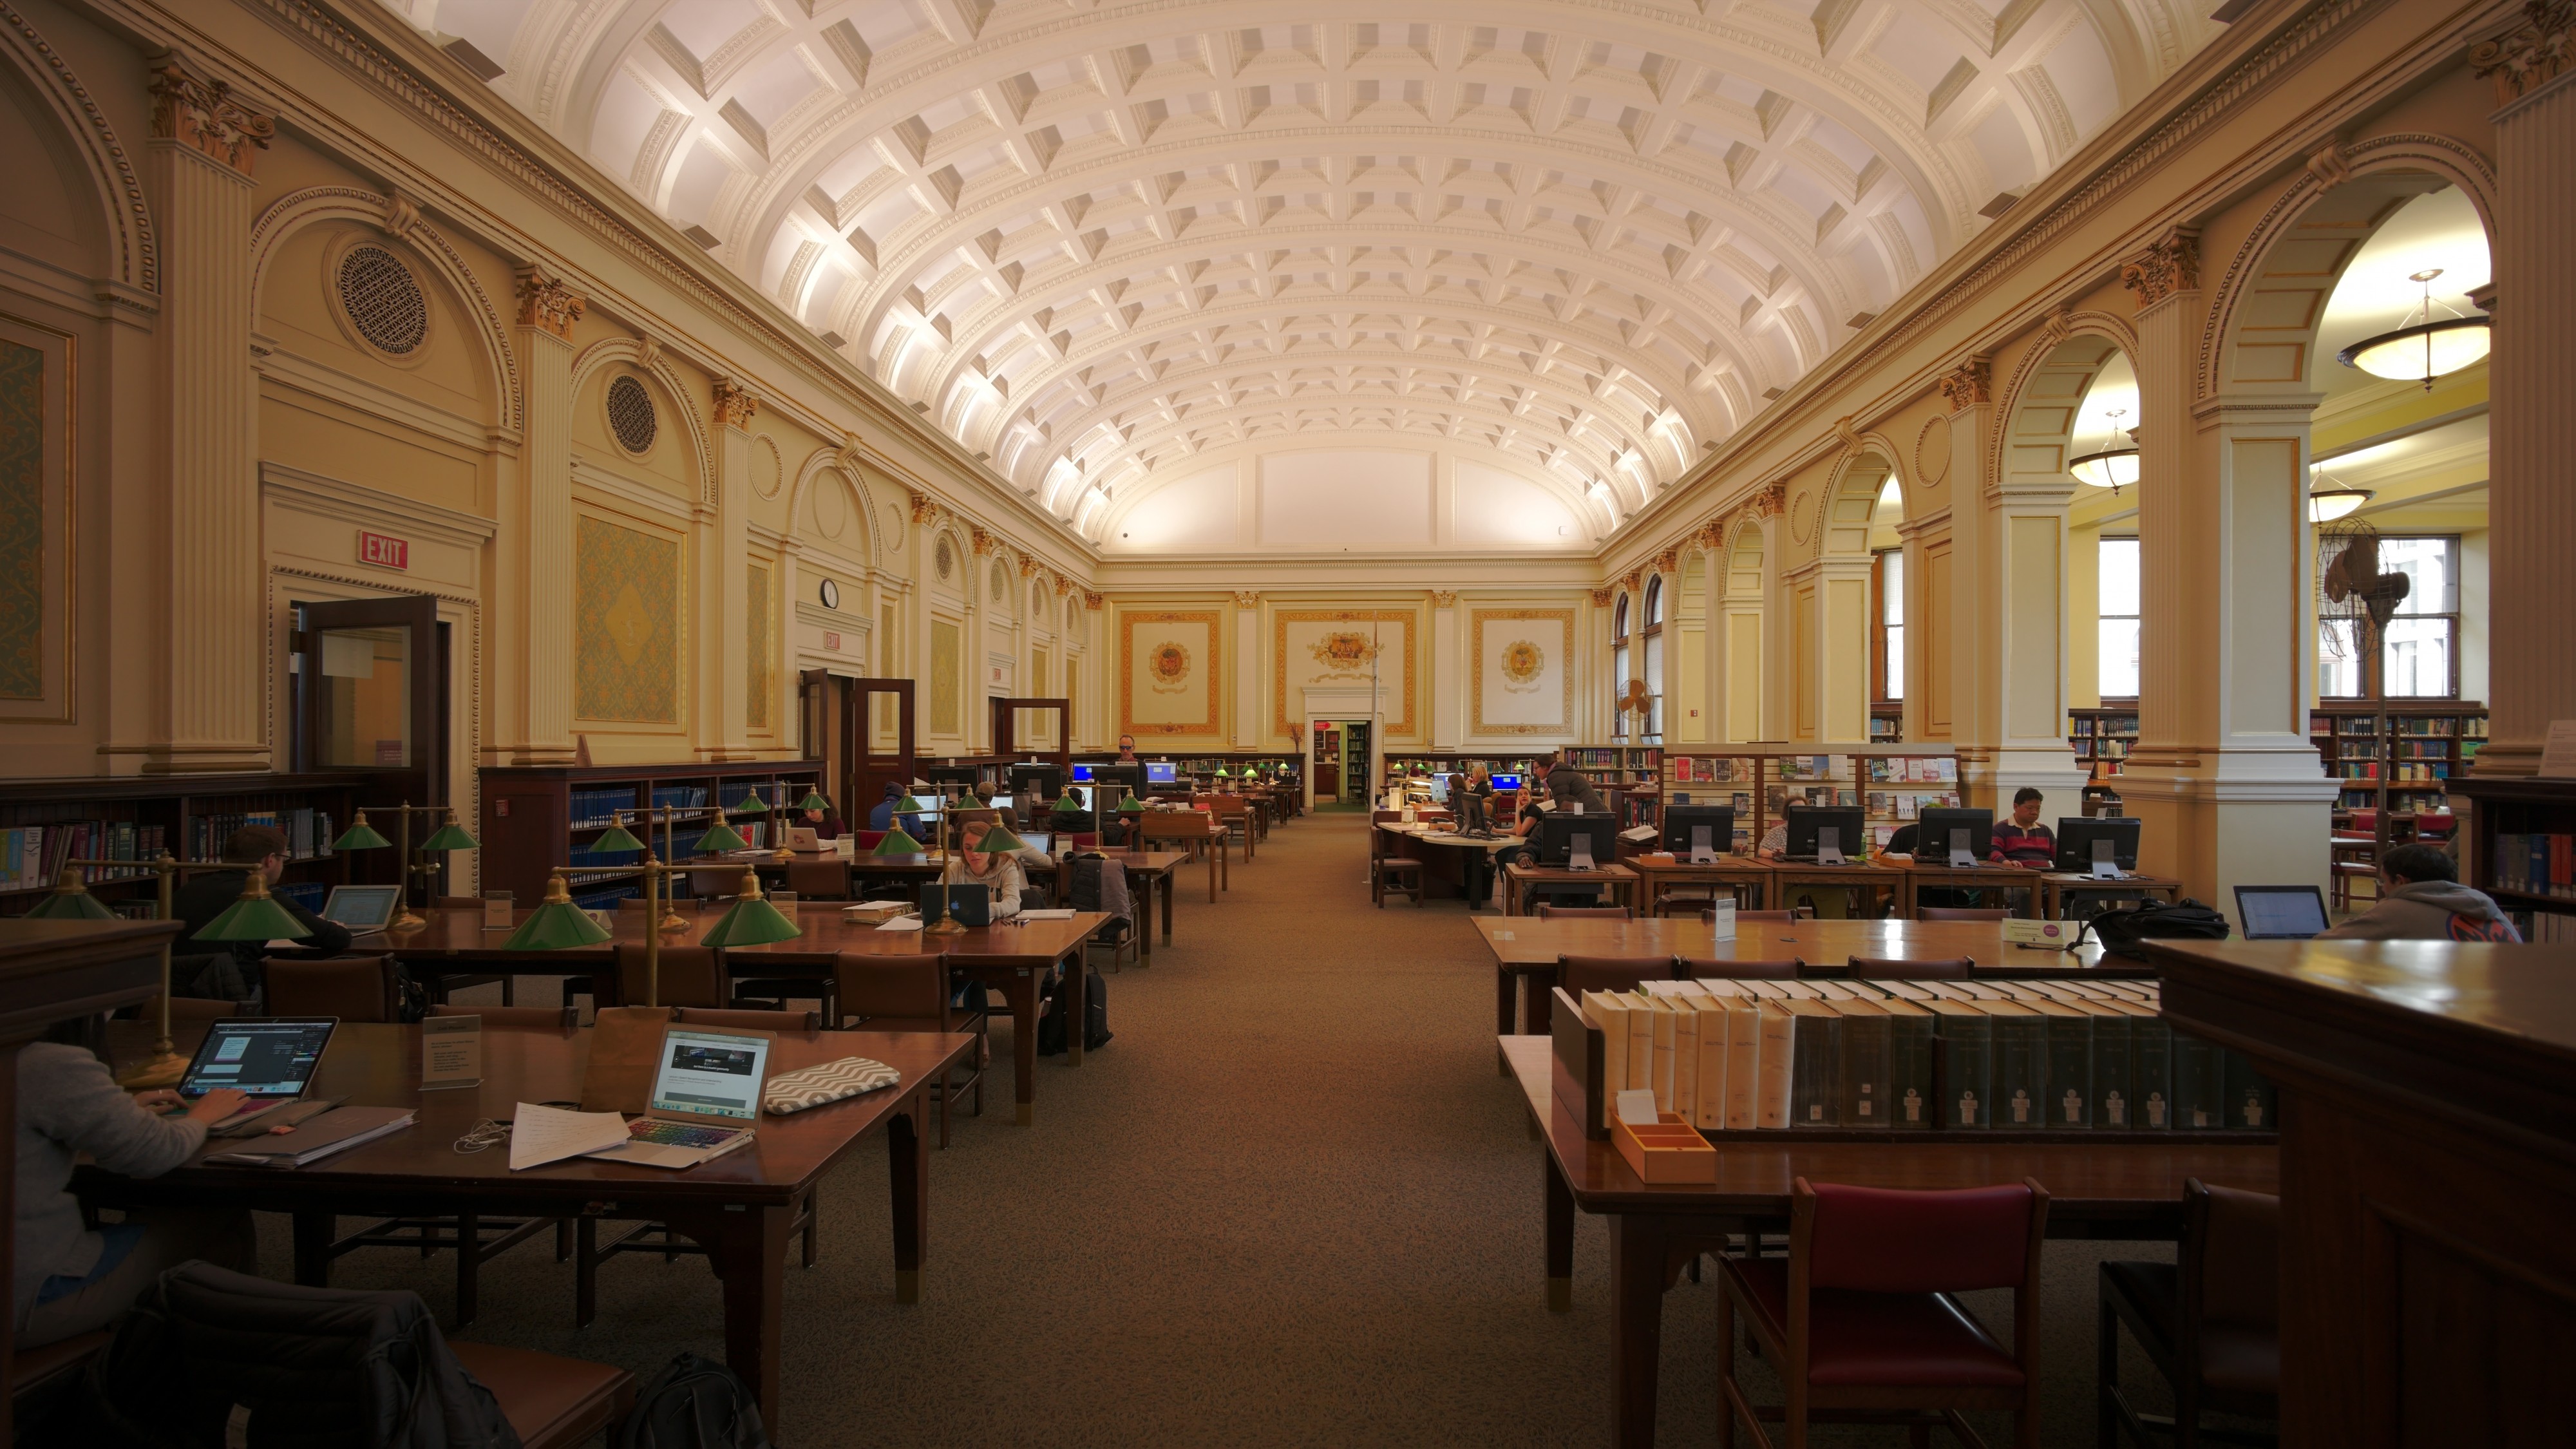 Interior of Carnegie Library of Pittsburgh